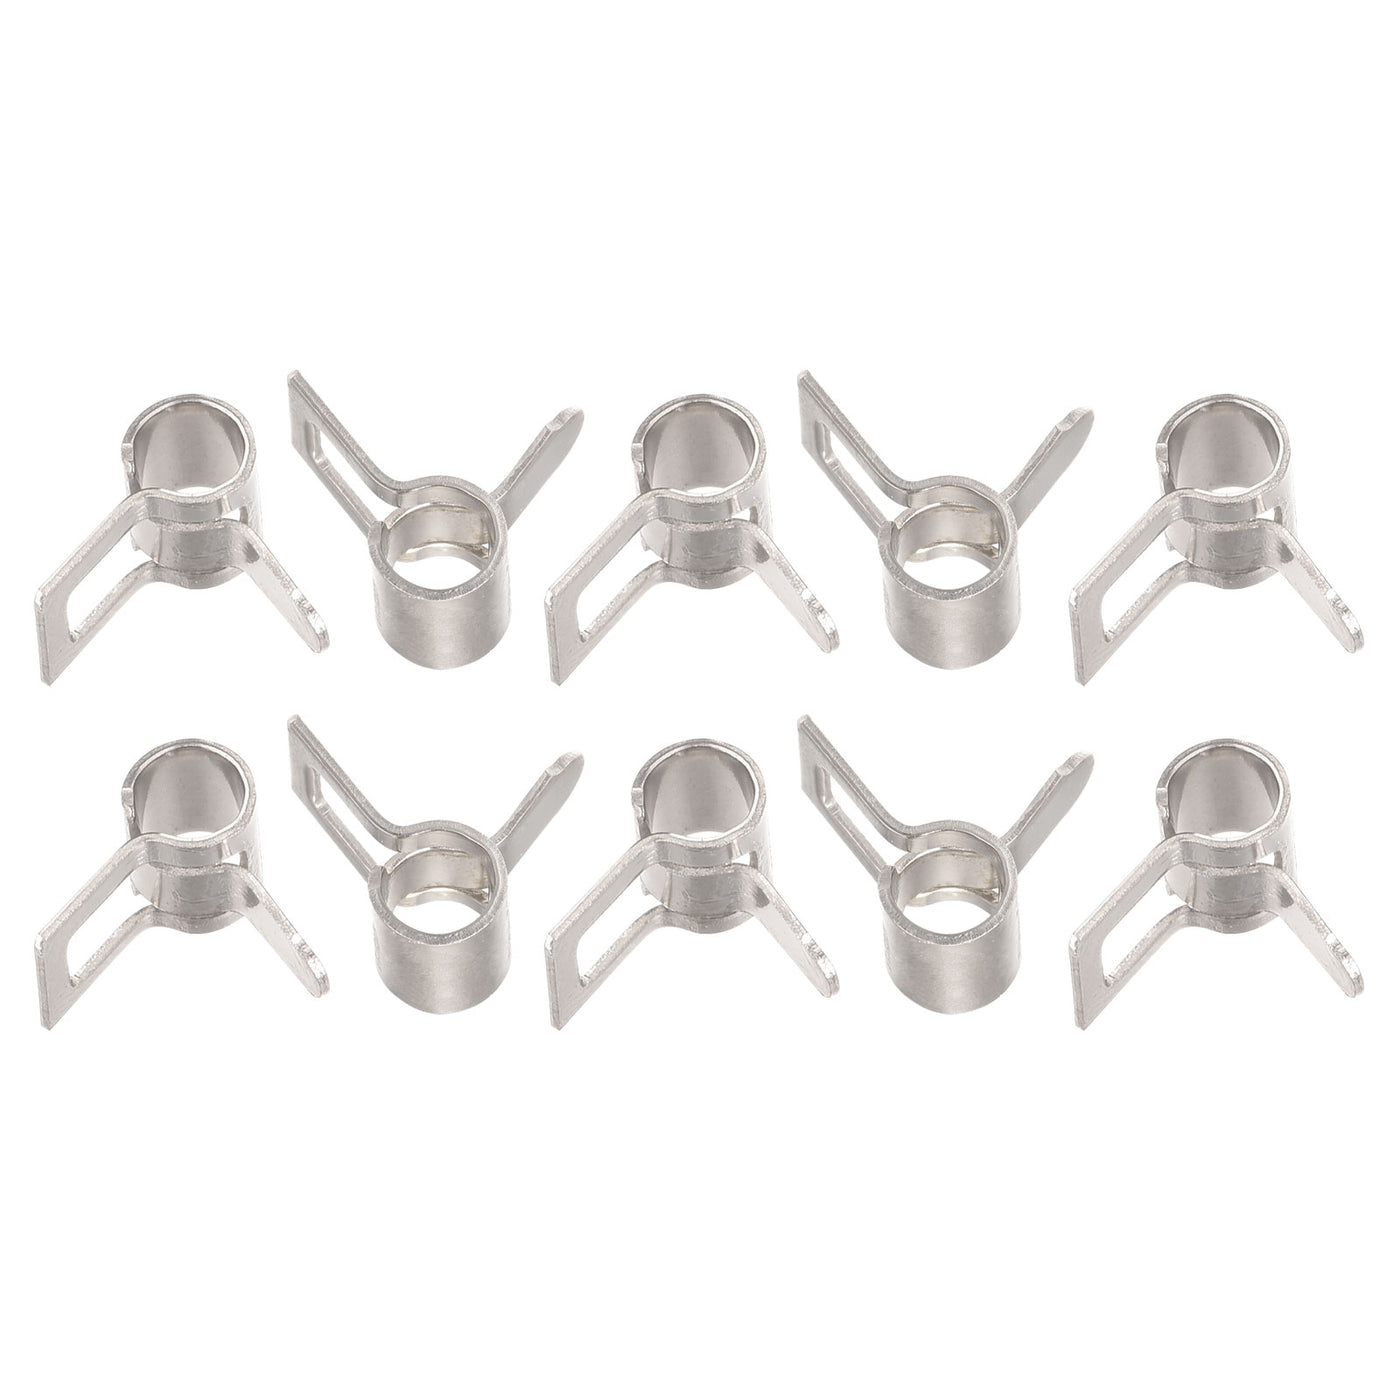 Uxcell Uxcell Spring Hose Clamp, 50pcs 65Mn Steel 15mm Low Pressure Air Clip, Nickel Plated